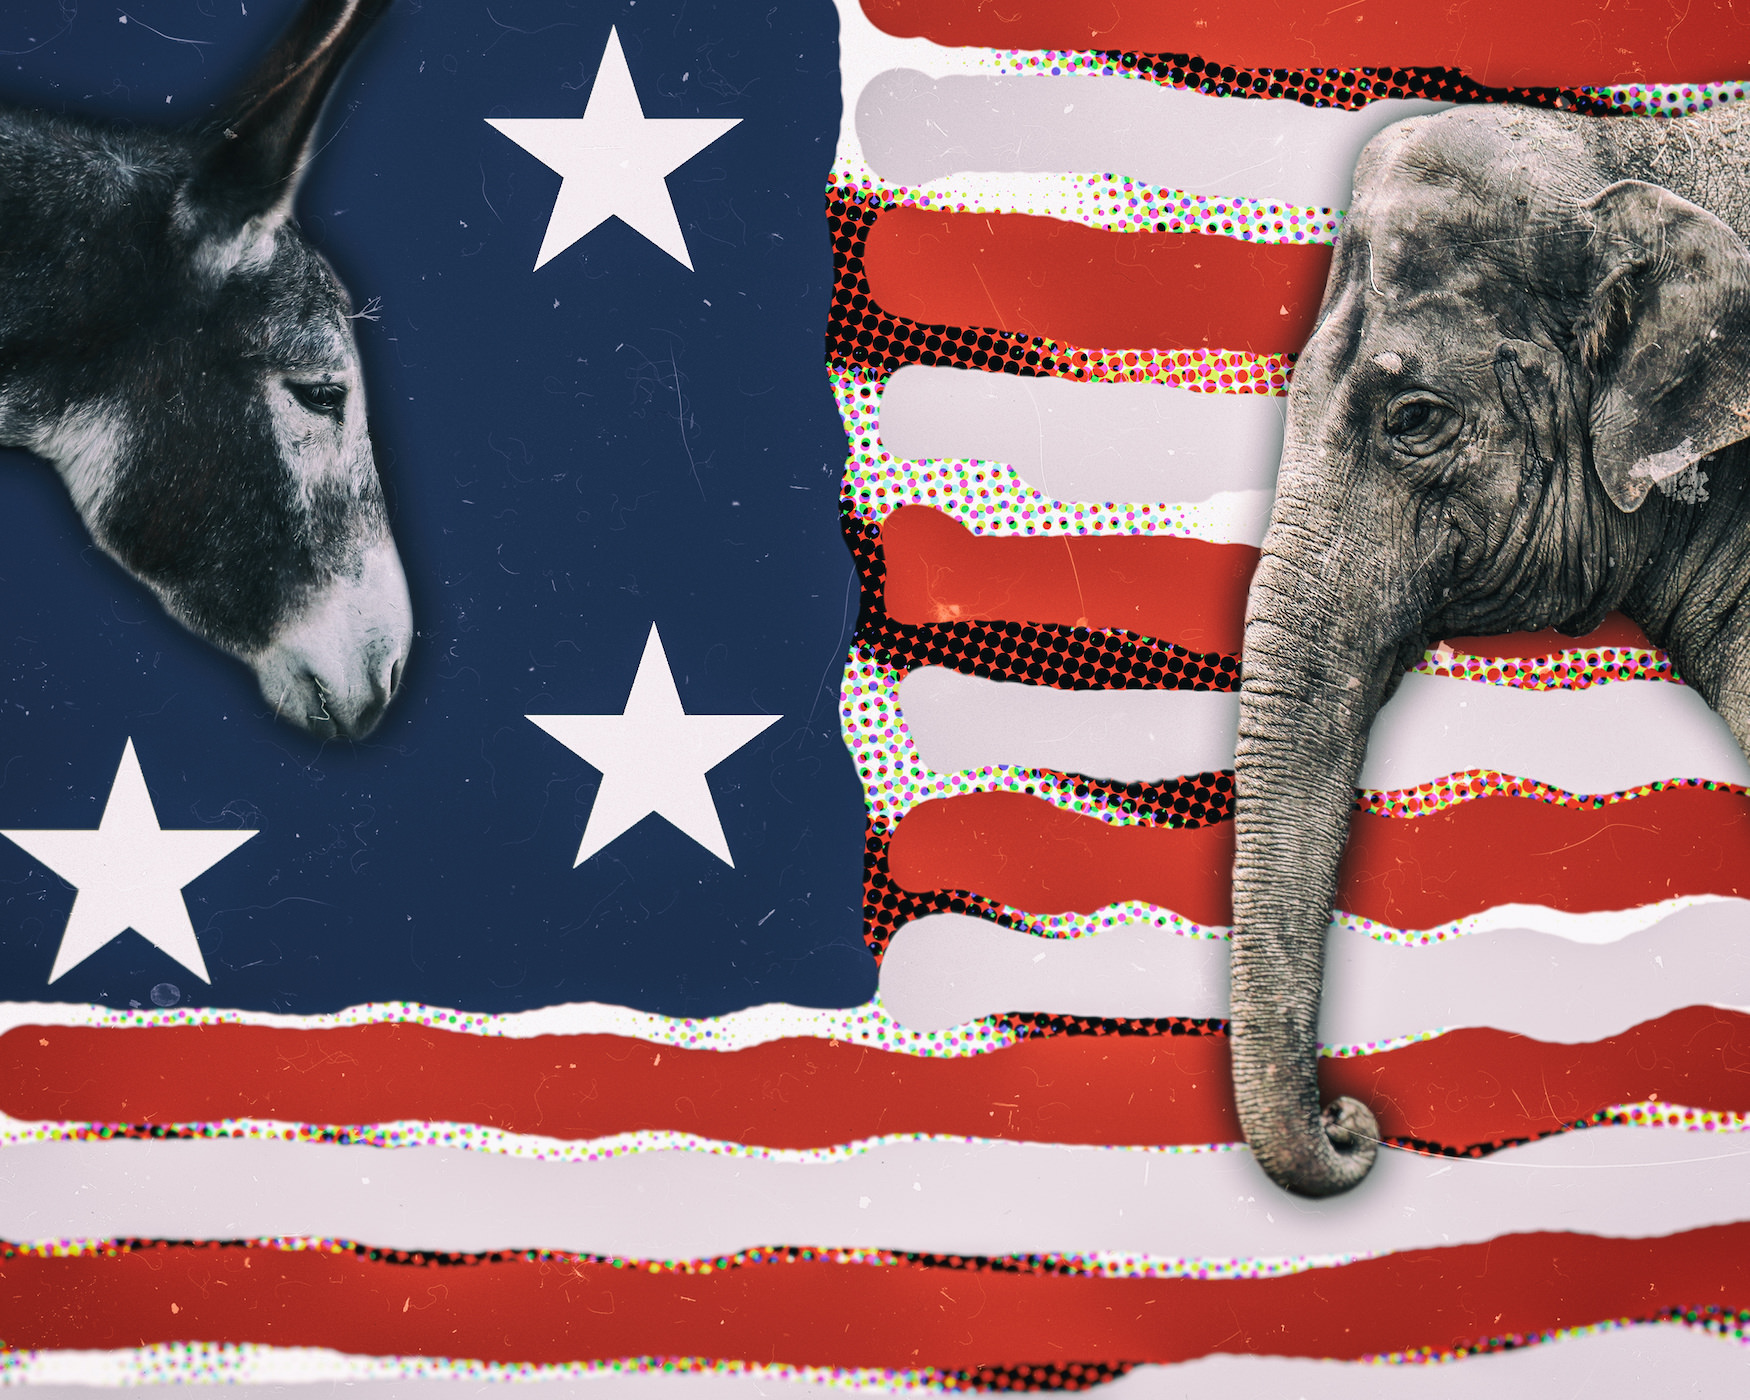 Donkey and elephant with an American flag in the background